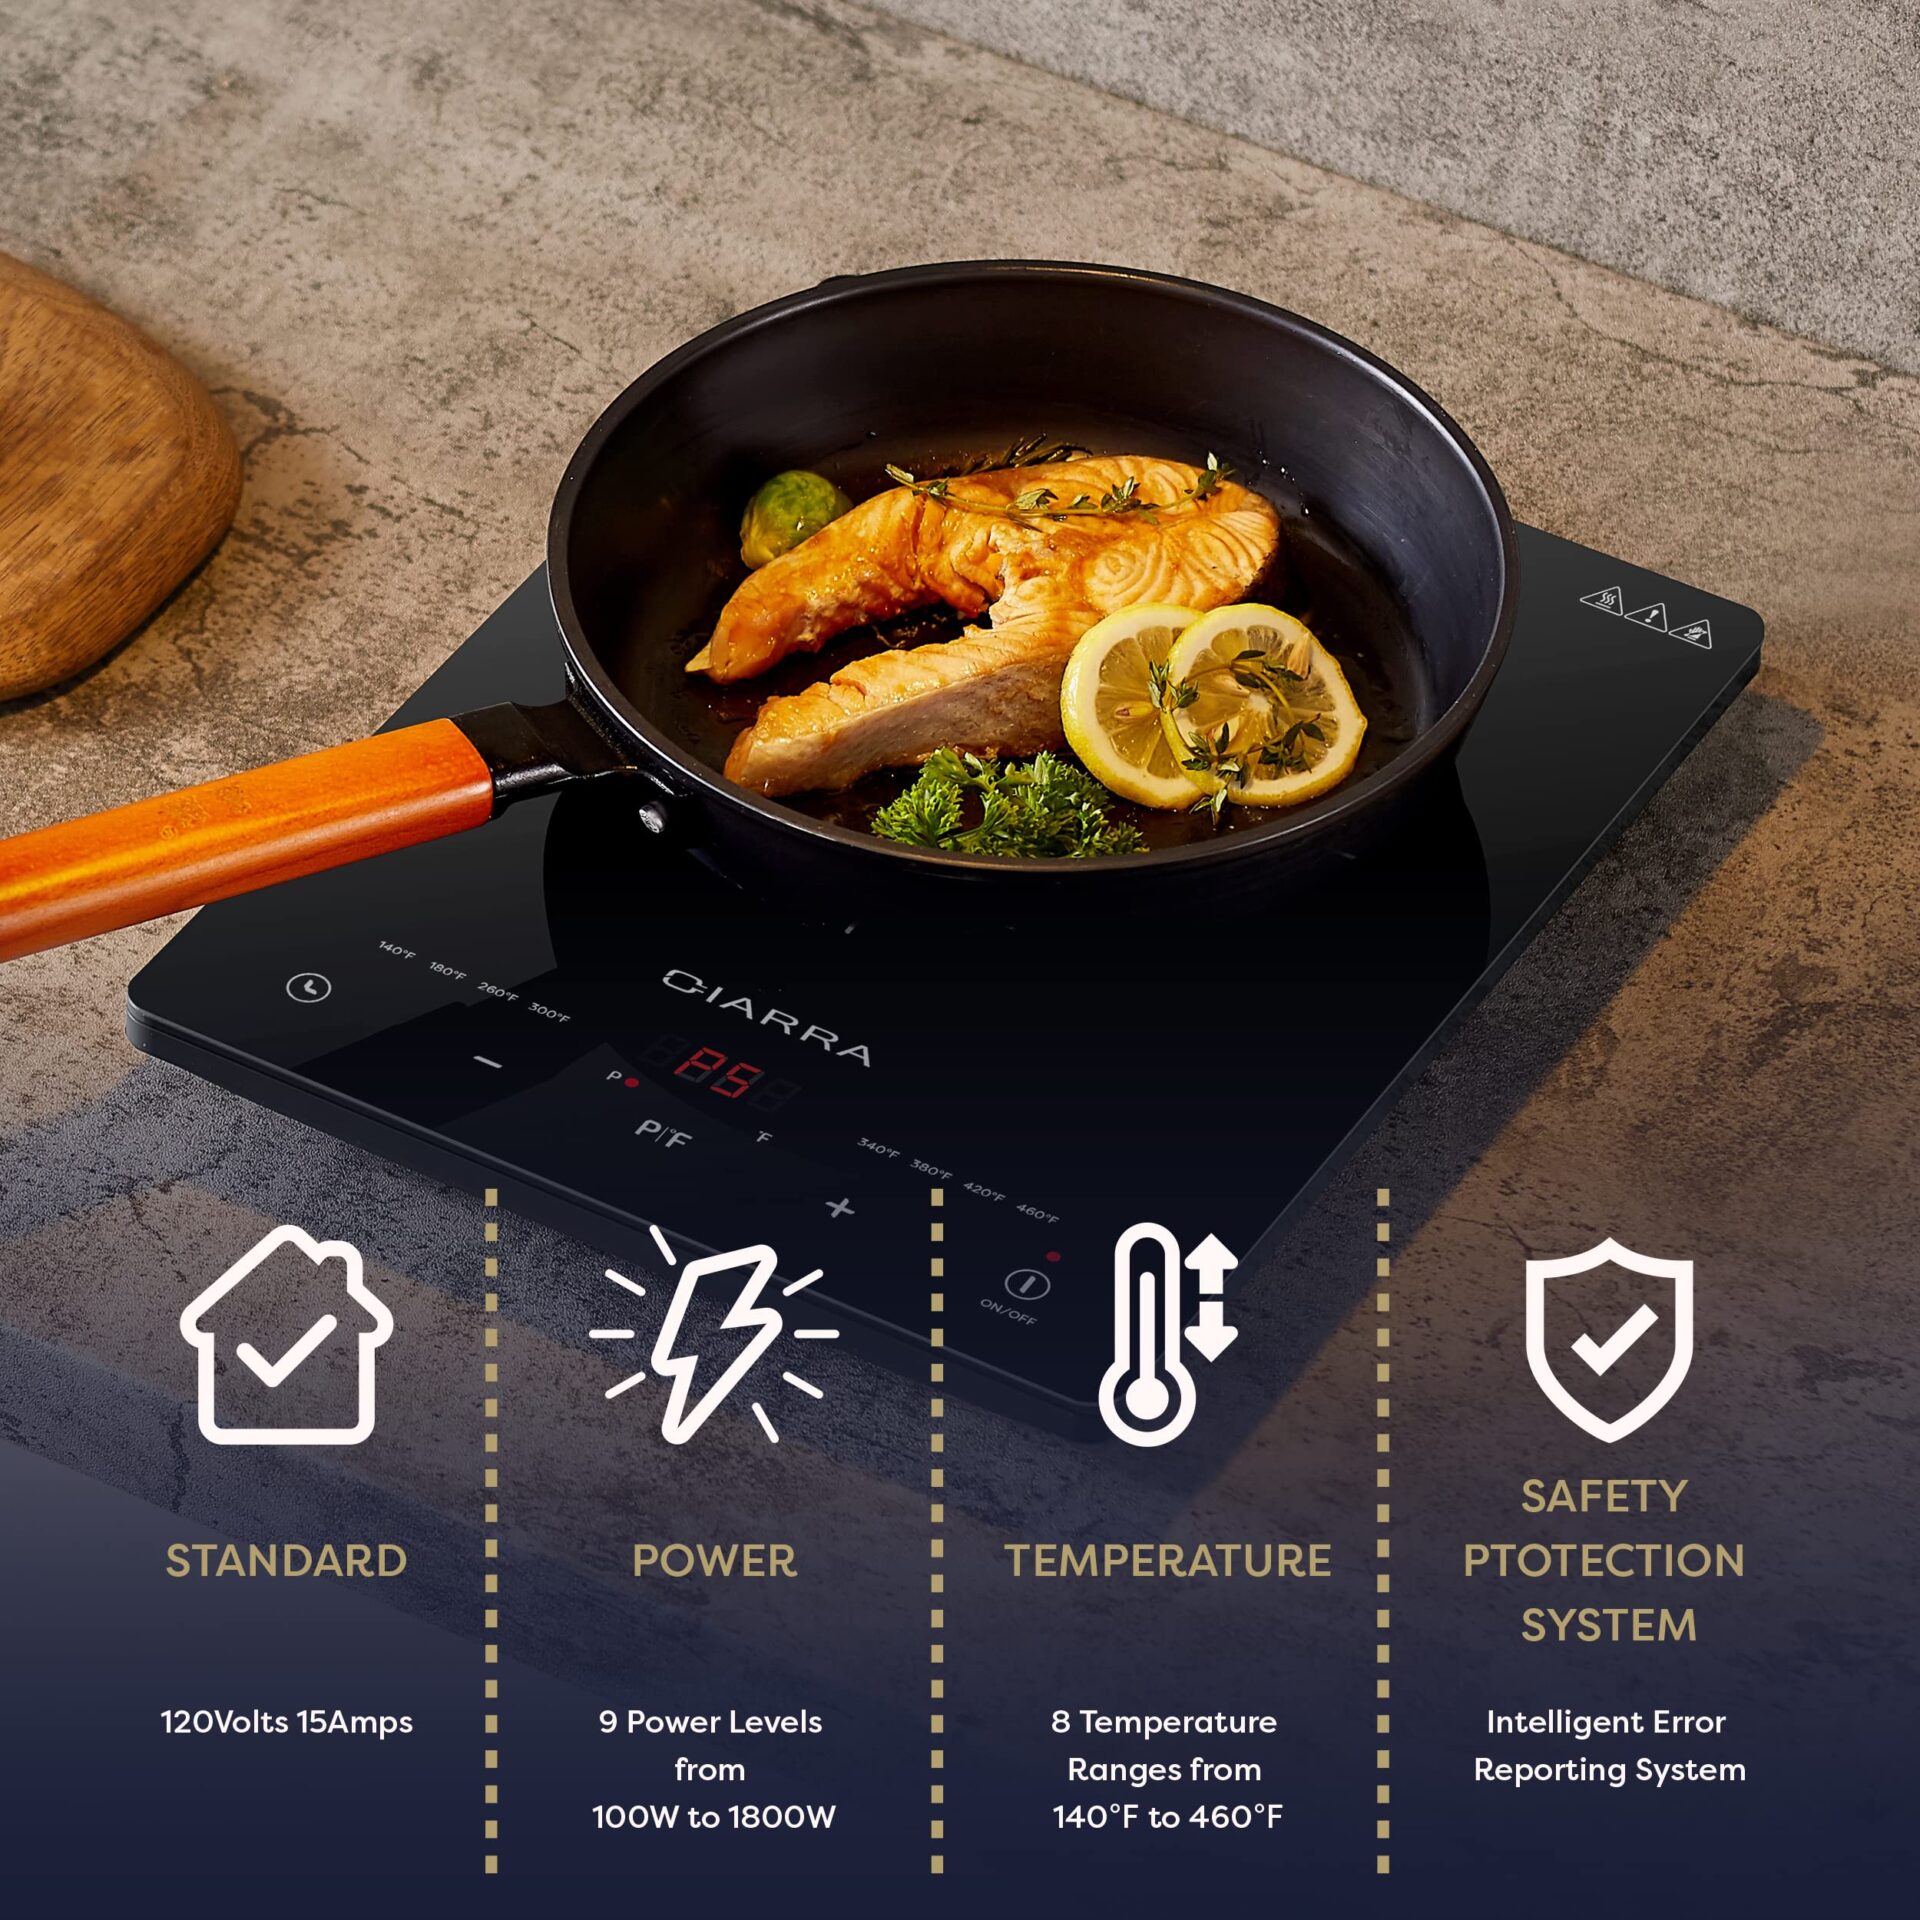 Portable Induction Cooktops